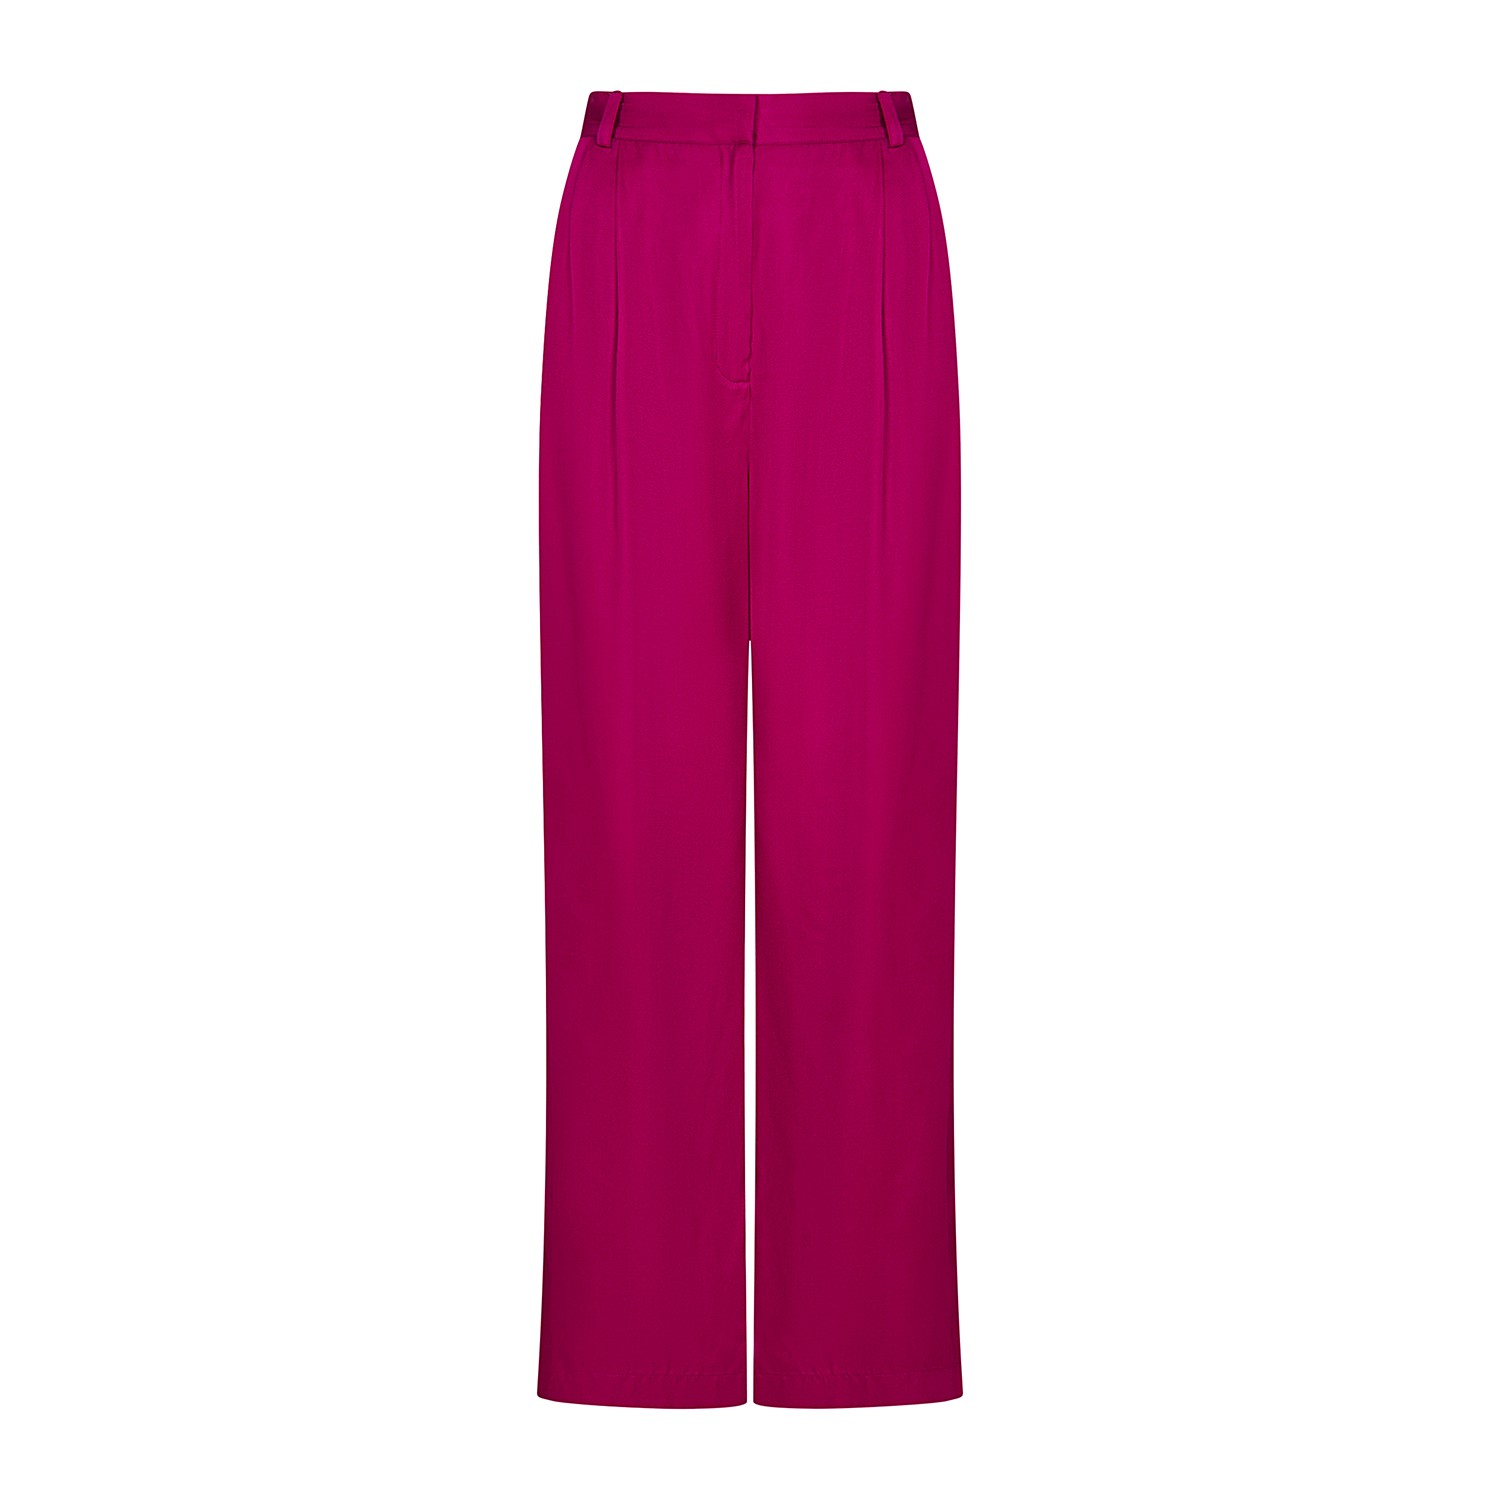 Women’s Pink / Purple The Suit Pants In Magenta Medium Roses are Red